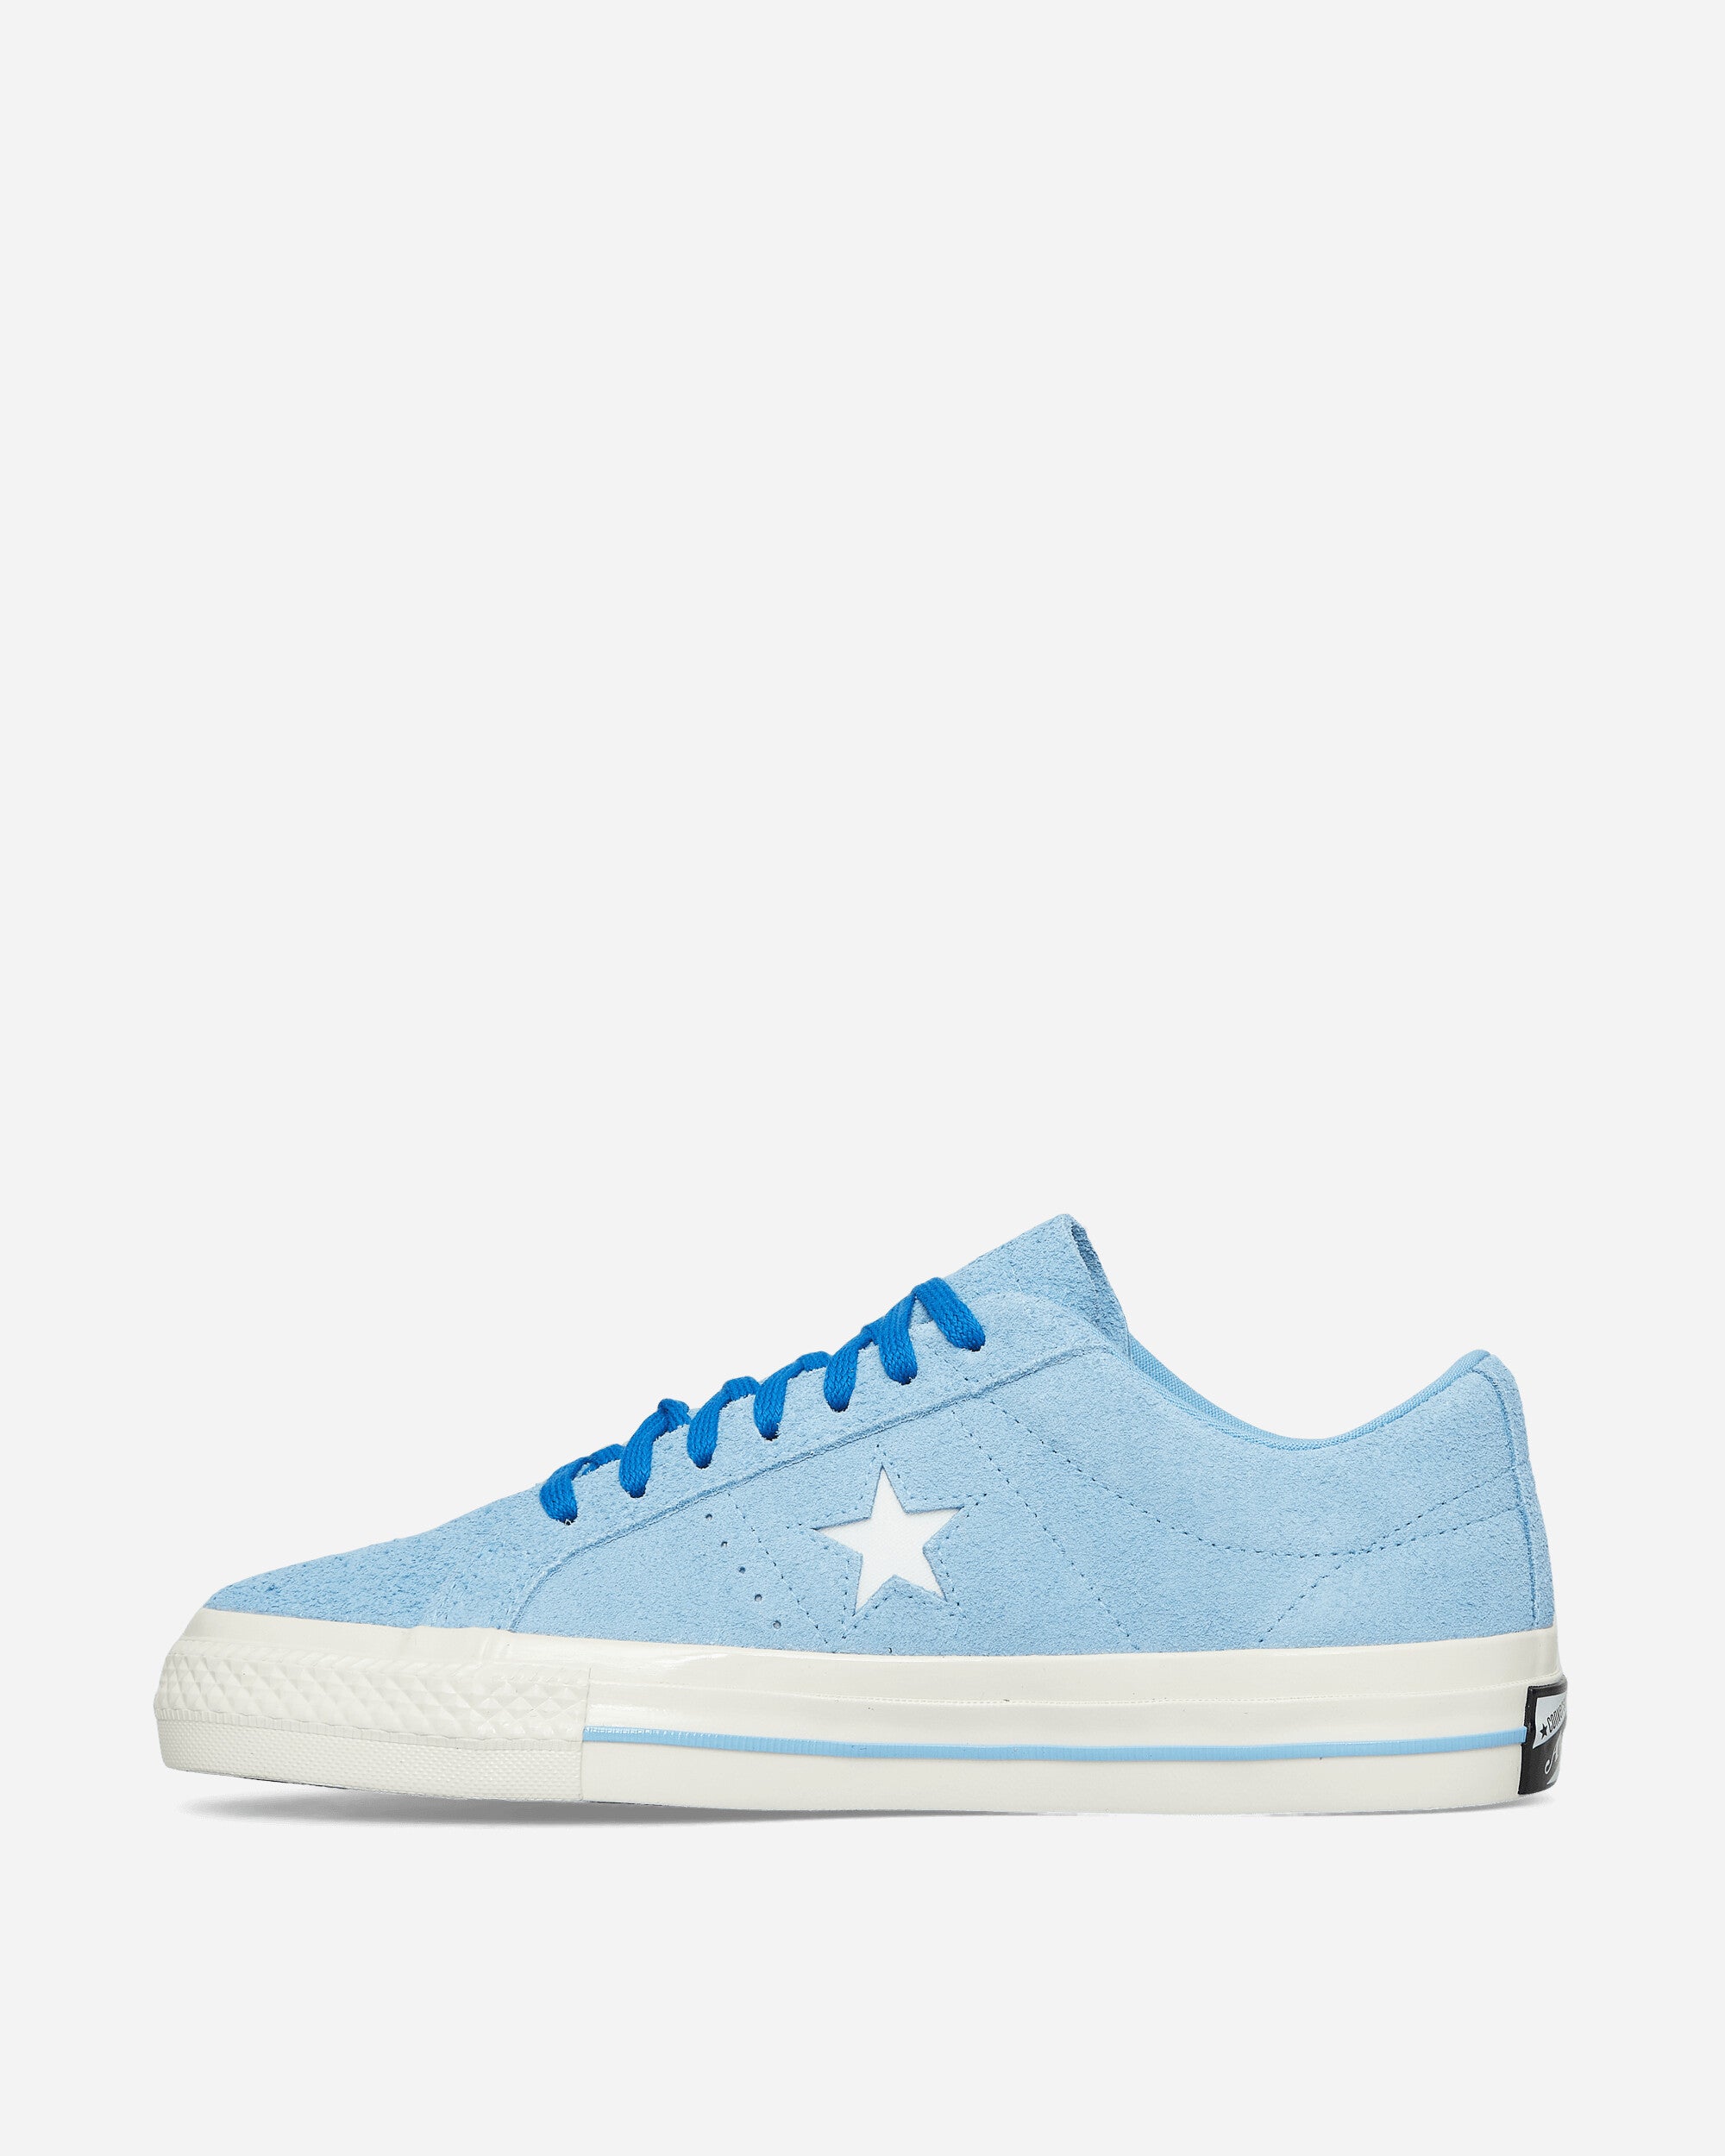 Converse Awake One Star Pro Blue/White/Egret Sneakers Low A07642C